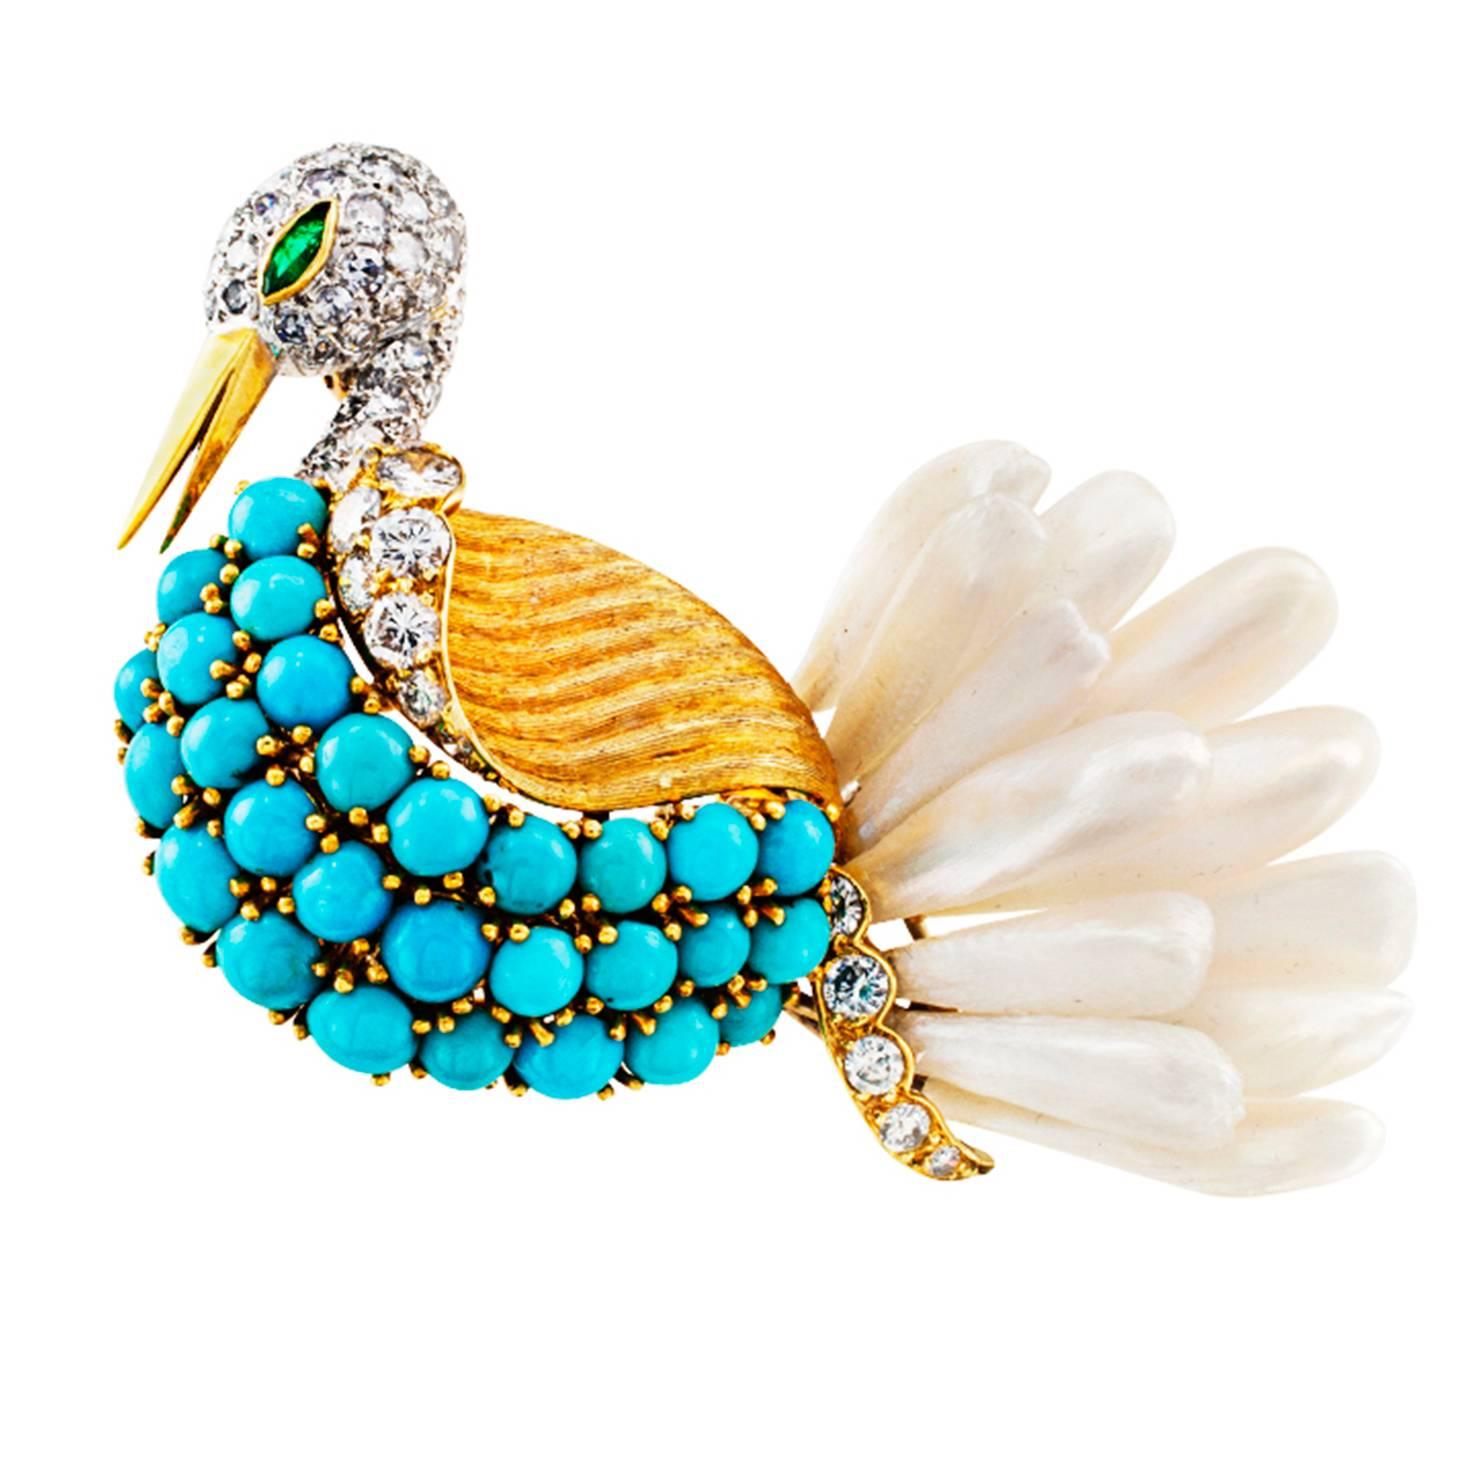 Swan Brooch Handcrafted with Petal Pearls Turquoise and Diamonds